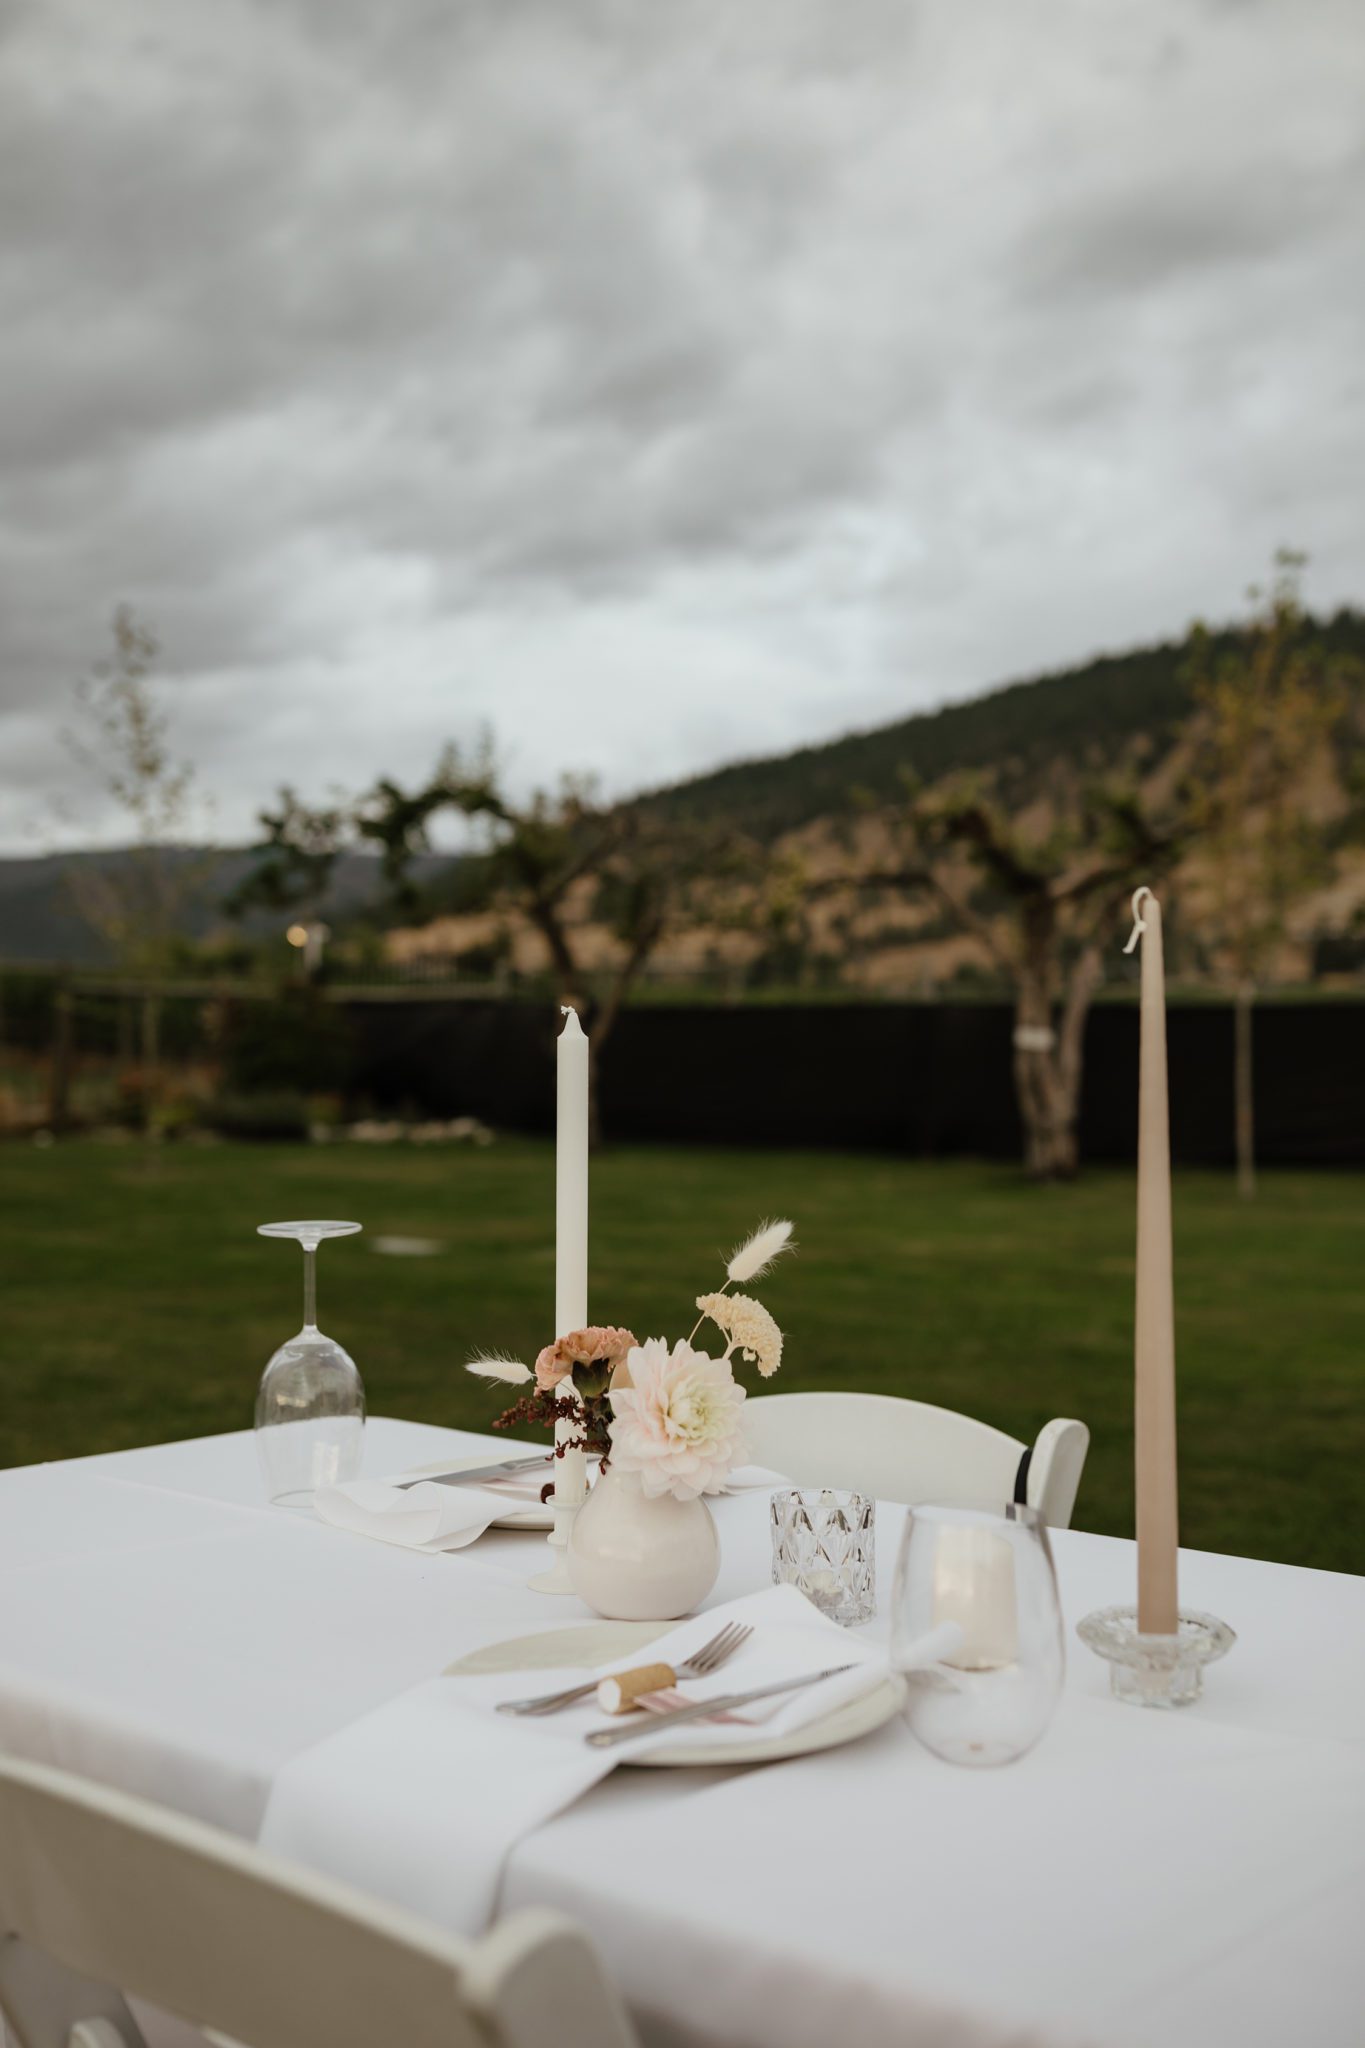 Elegantly styled summer wedding decor for your outdoor reception